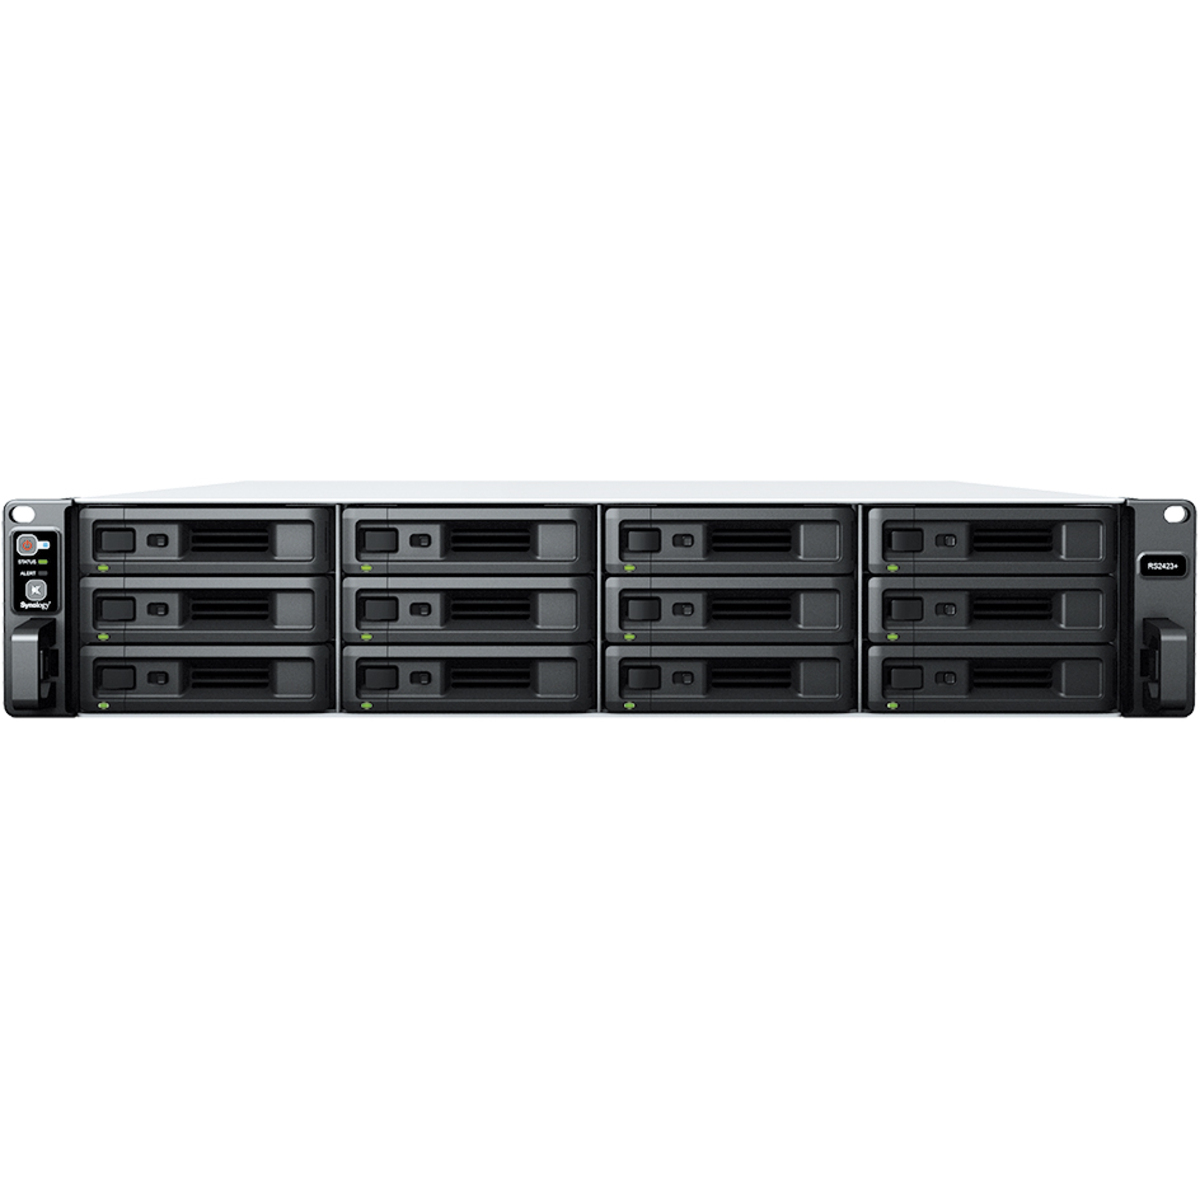 Synology RackStation RS2423+ 24tb 12-Bay RackMount Multimedia / Power User / Business NAS - Network Attached Storage Device 12x2tb Western Digital Red SA500 WDS200T1R0A 2.5 560/530MB/s SATA 6Gb/s SSD NAS Class Drives Installed - Burn-In Tested RackStation RS2423+